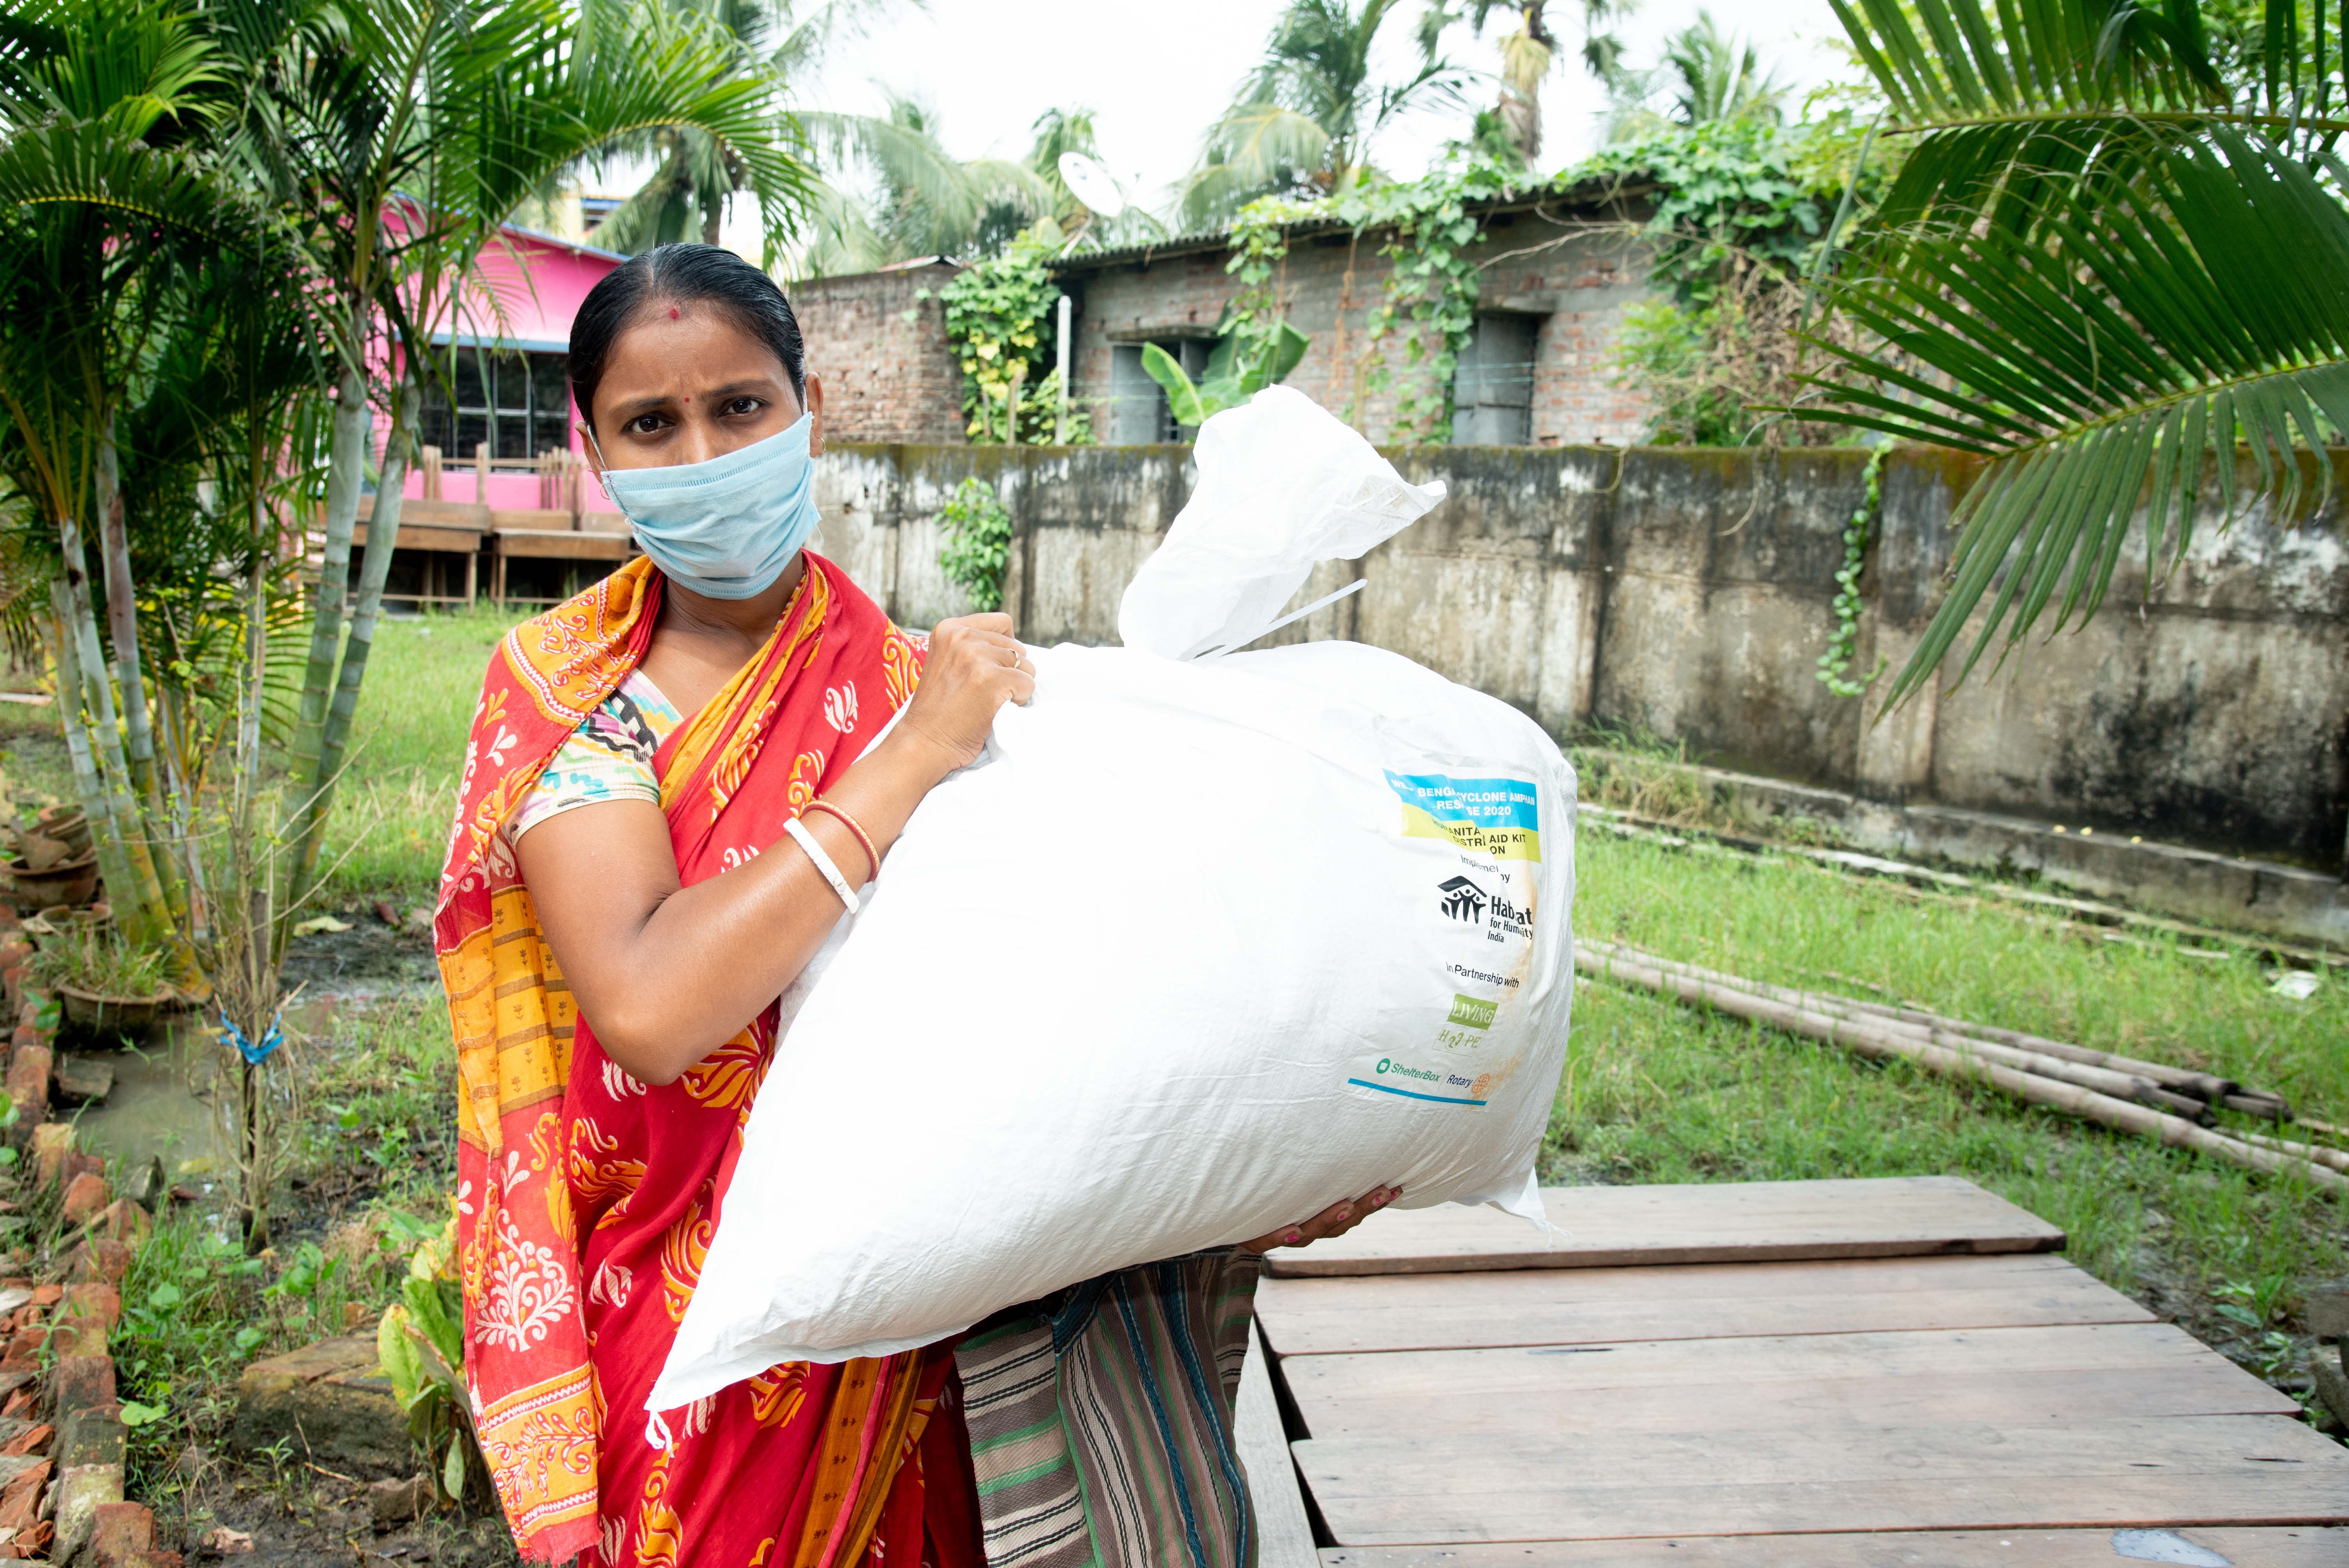 ShelterBox distributes emergency shelter to India, in response to Cyclone Amphan